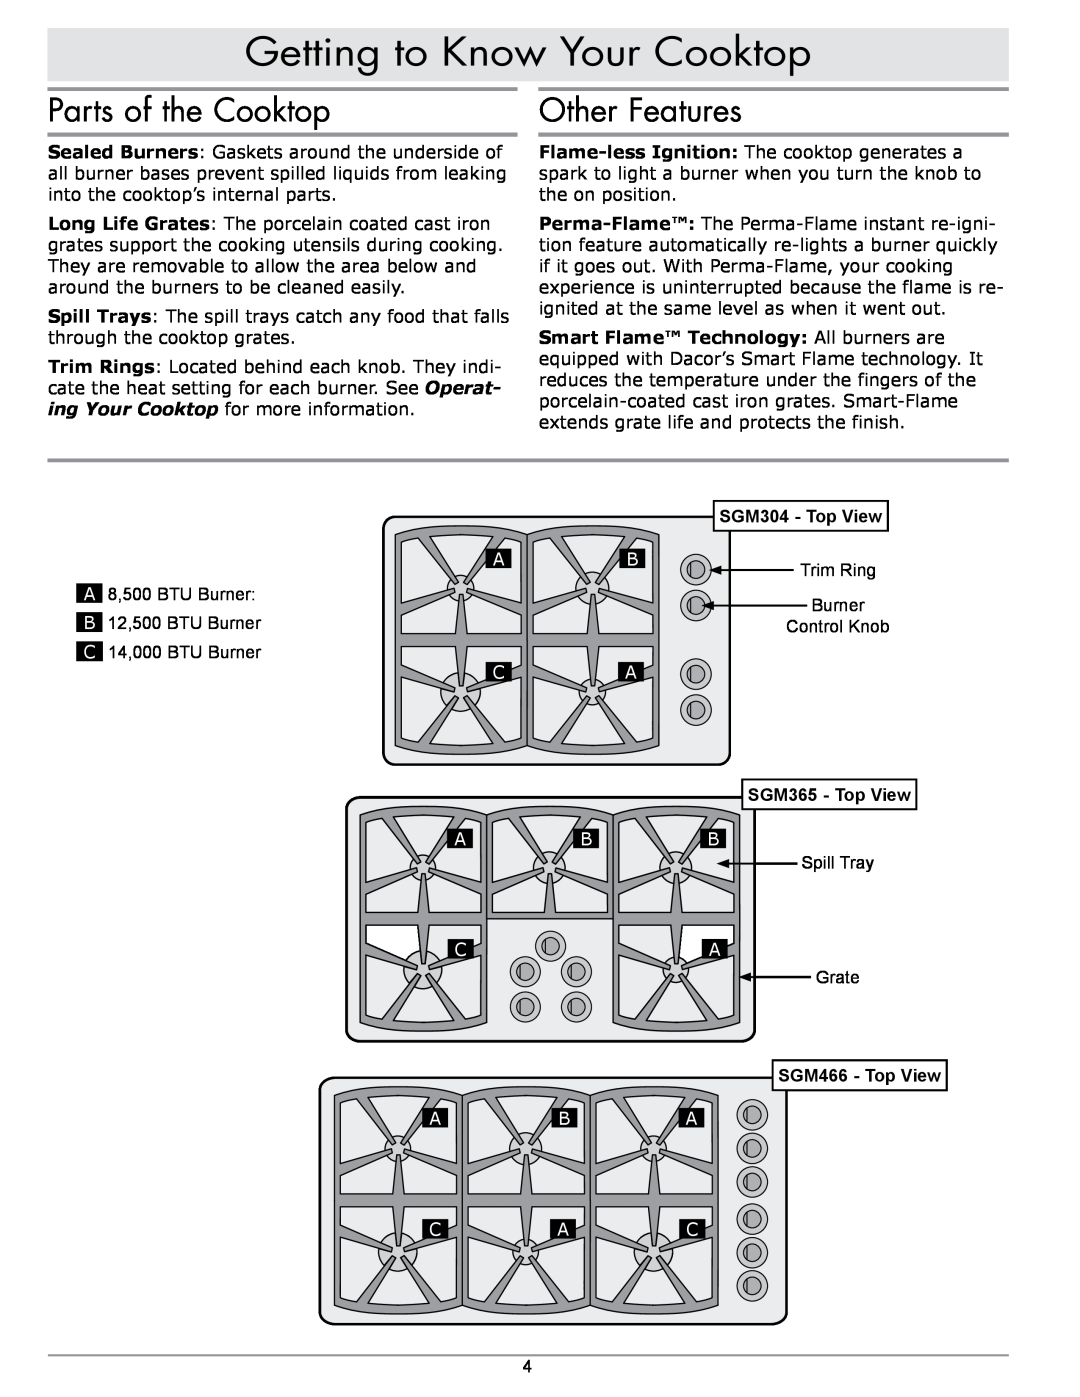 Sears Getting to Know Your Cooktop, Parts of the Cooktop, Other Features, SGM365 - Top View, SGM466 - Top View, Burner 